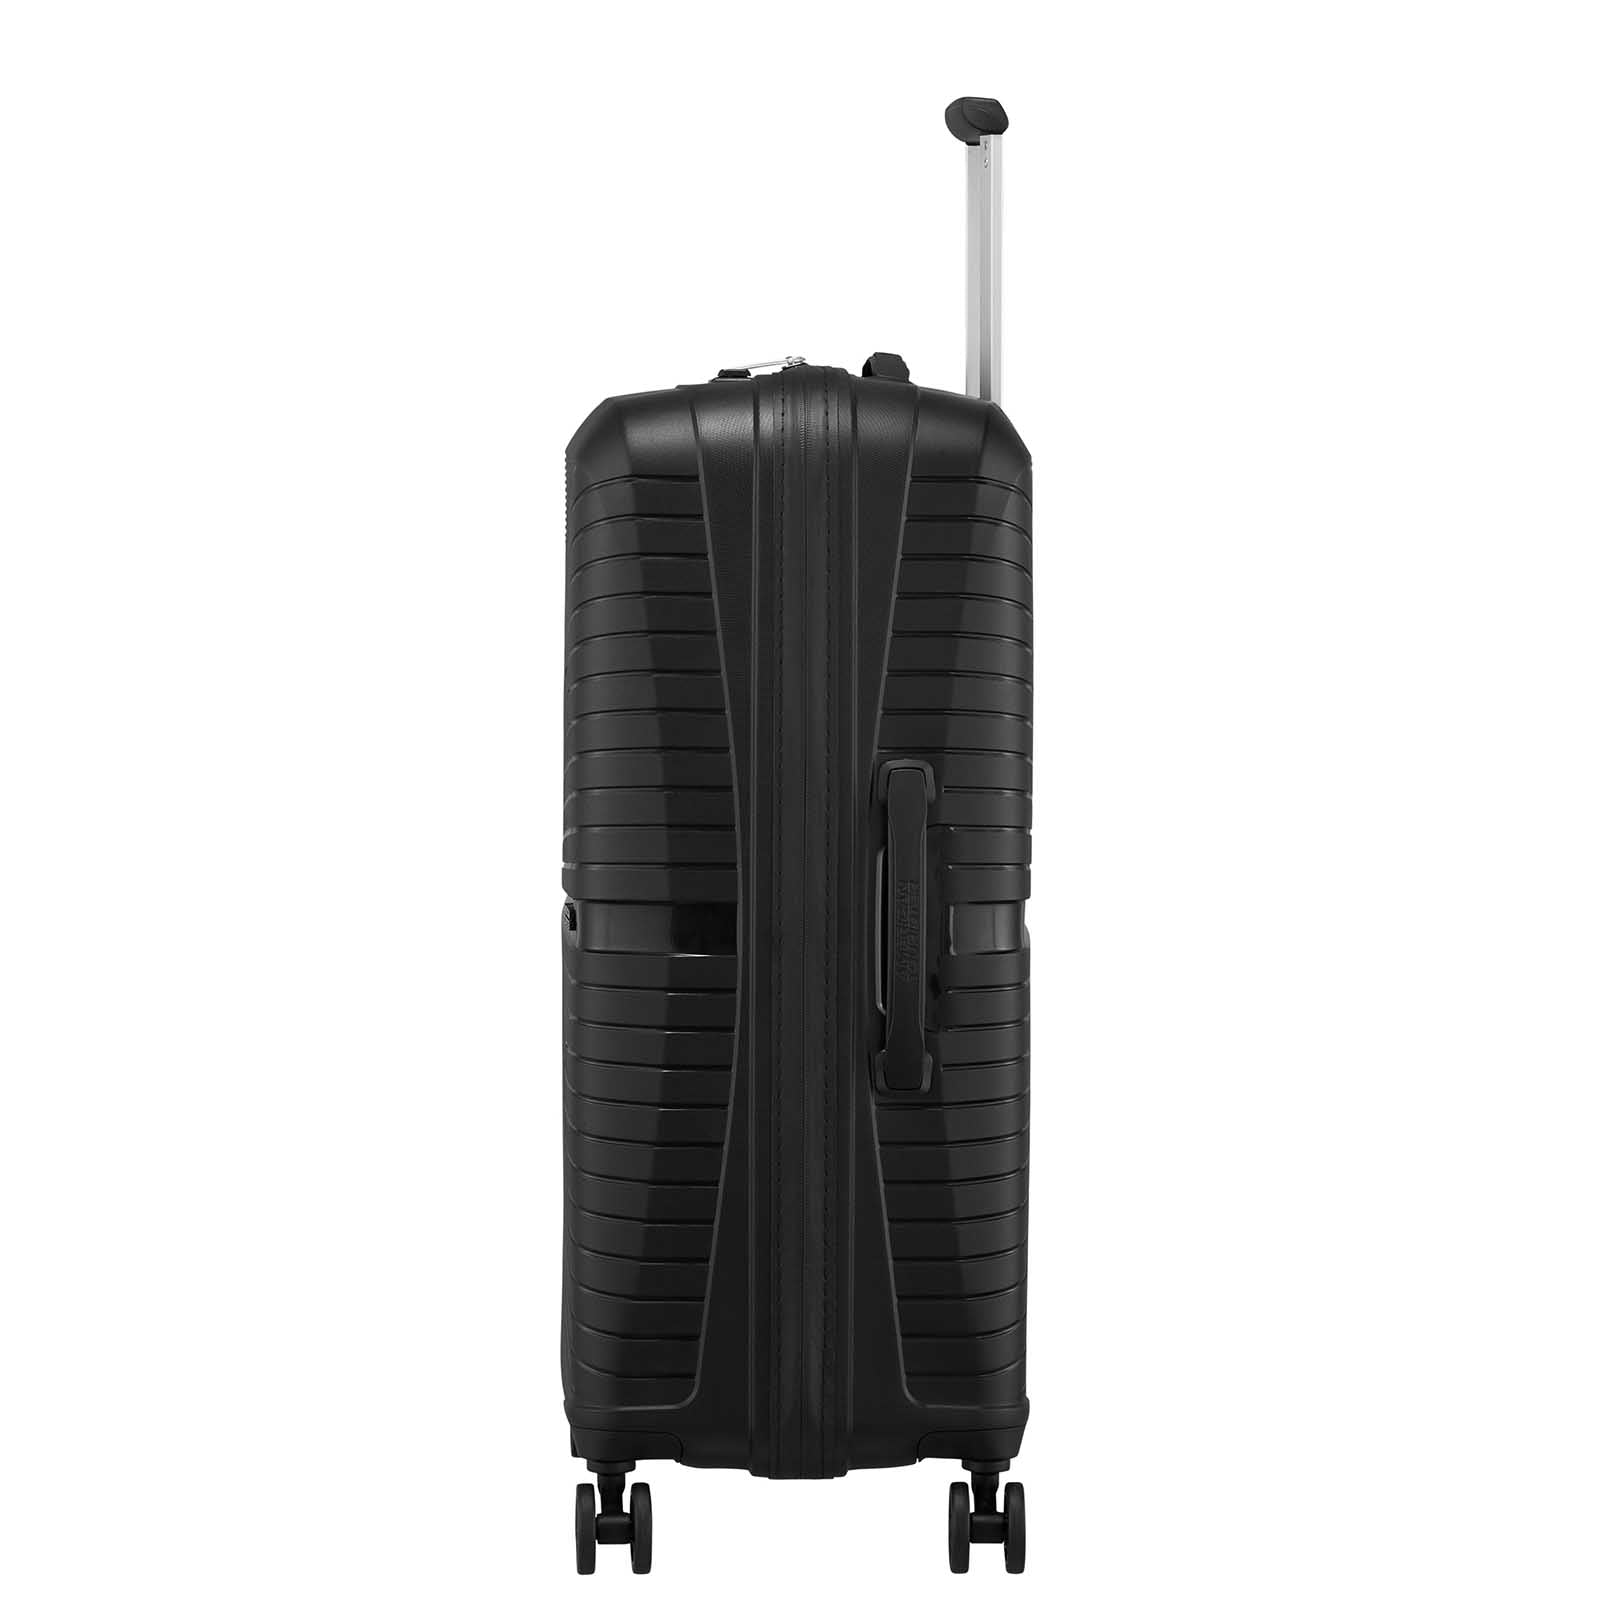 American-Tourister-Airconic-67cm-Suitcase-Onyx-Black-Side-Handle